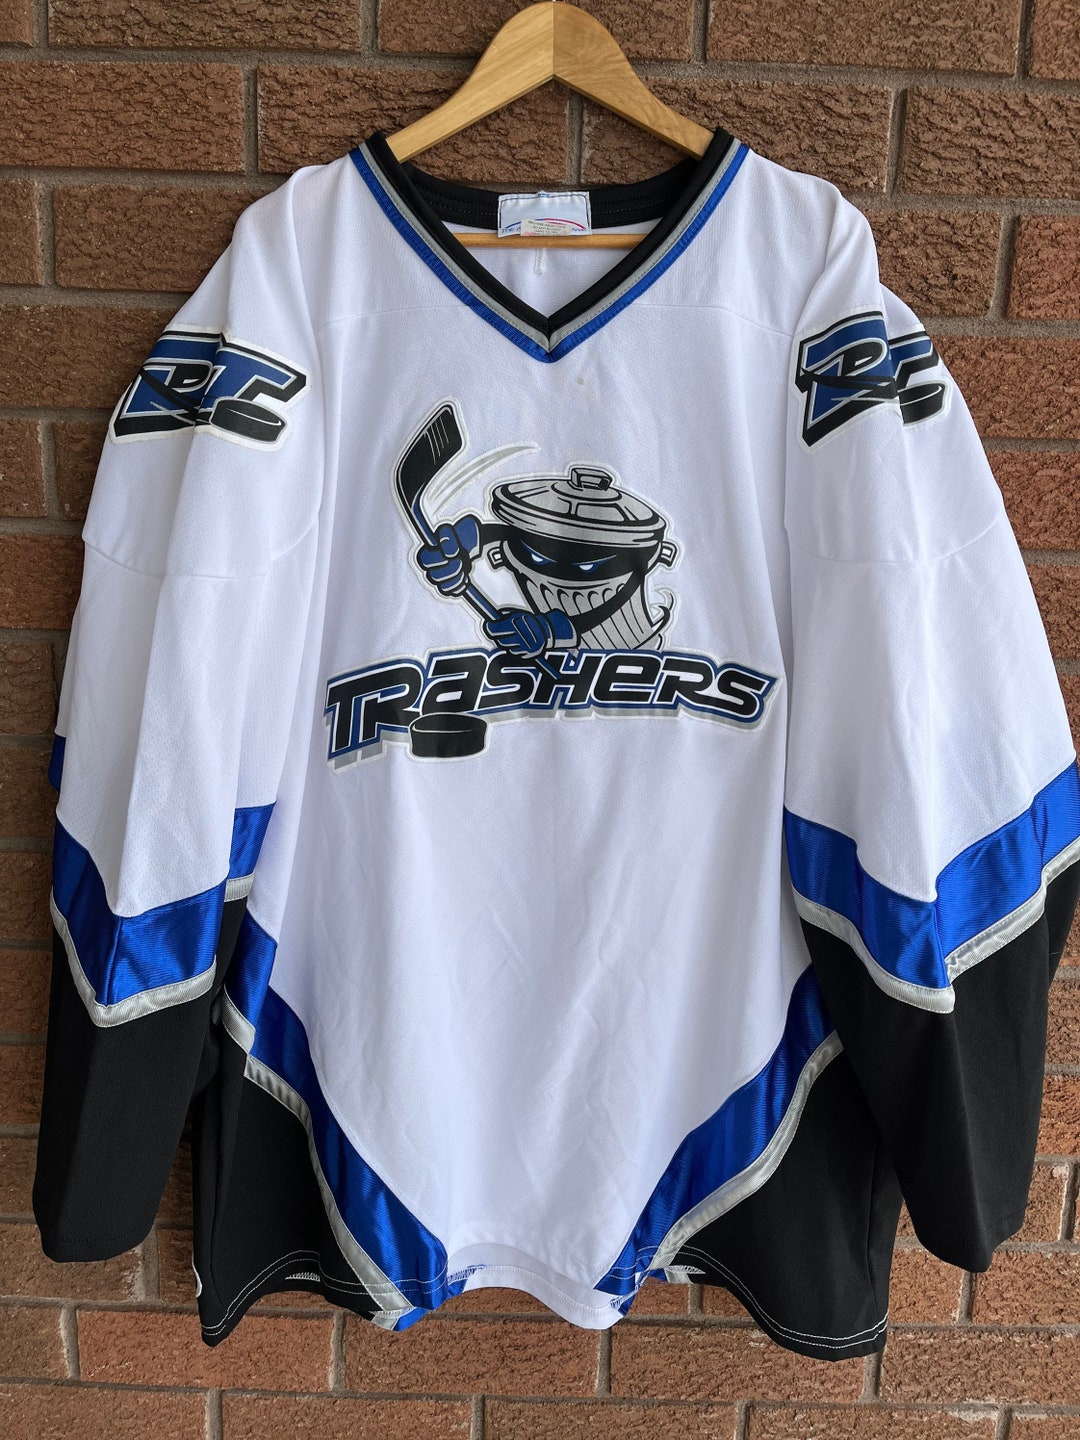 Danbury Trashers Signed Memorabilia and Collectibles